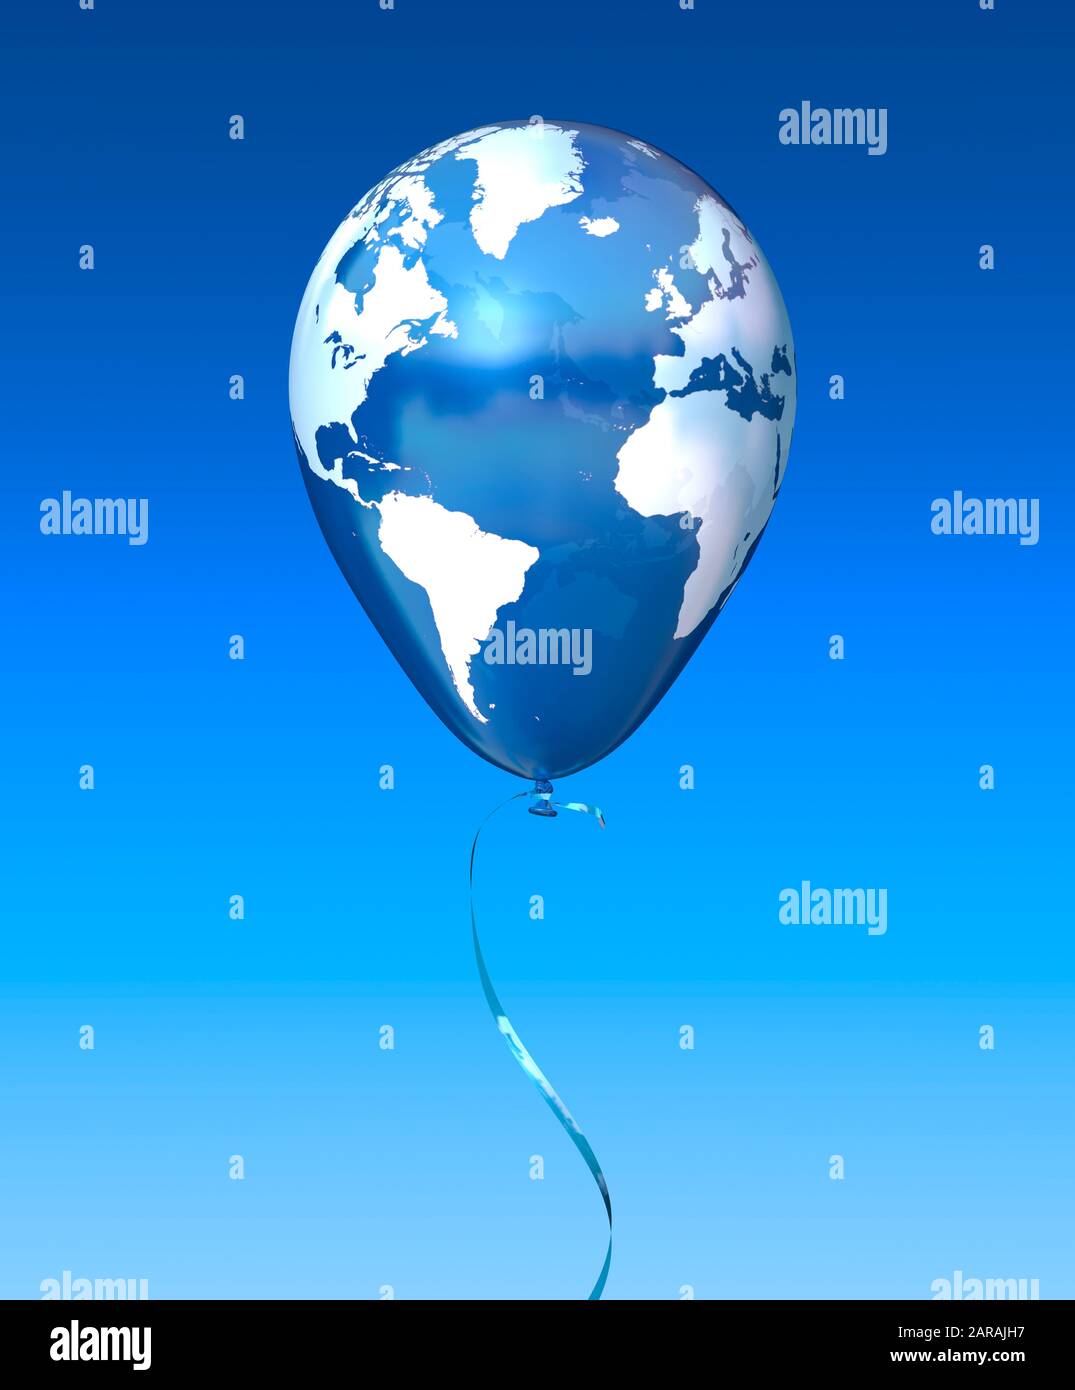 Balloon in the shape of a globe floating in a blue sky. Vulnerable, fragile, delicate balance. Stock Photo